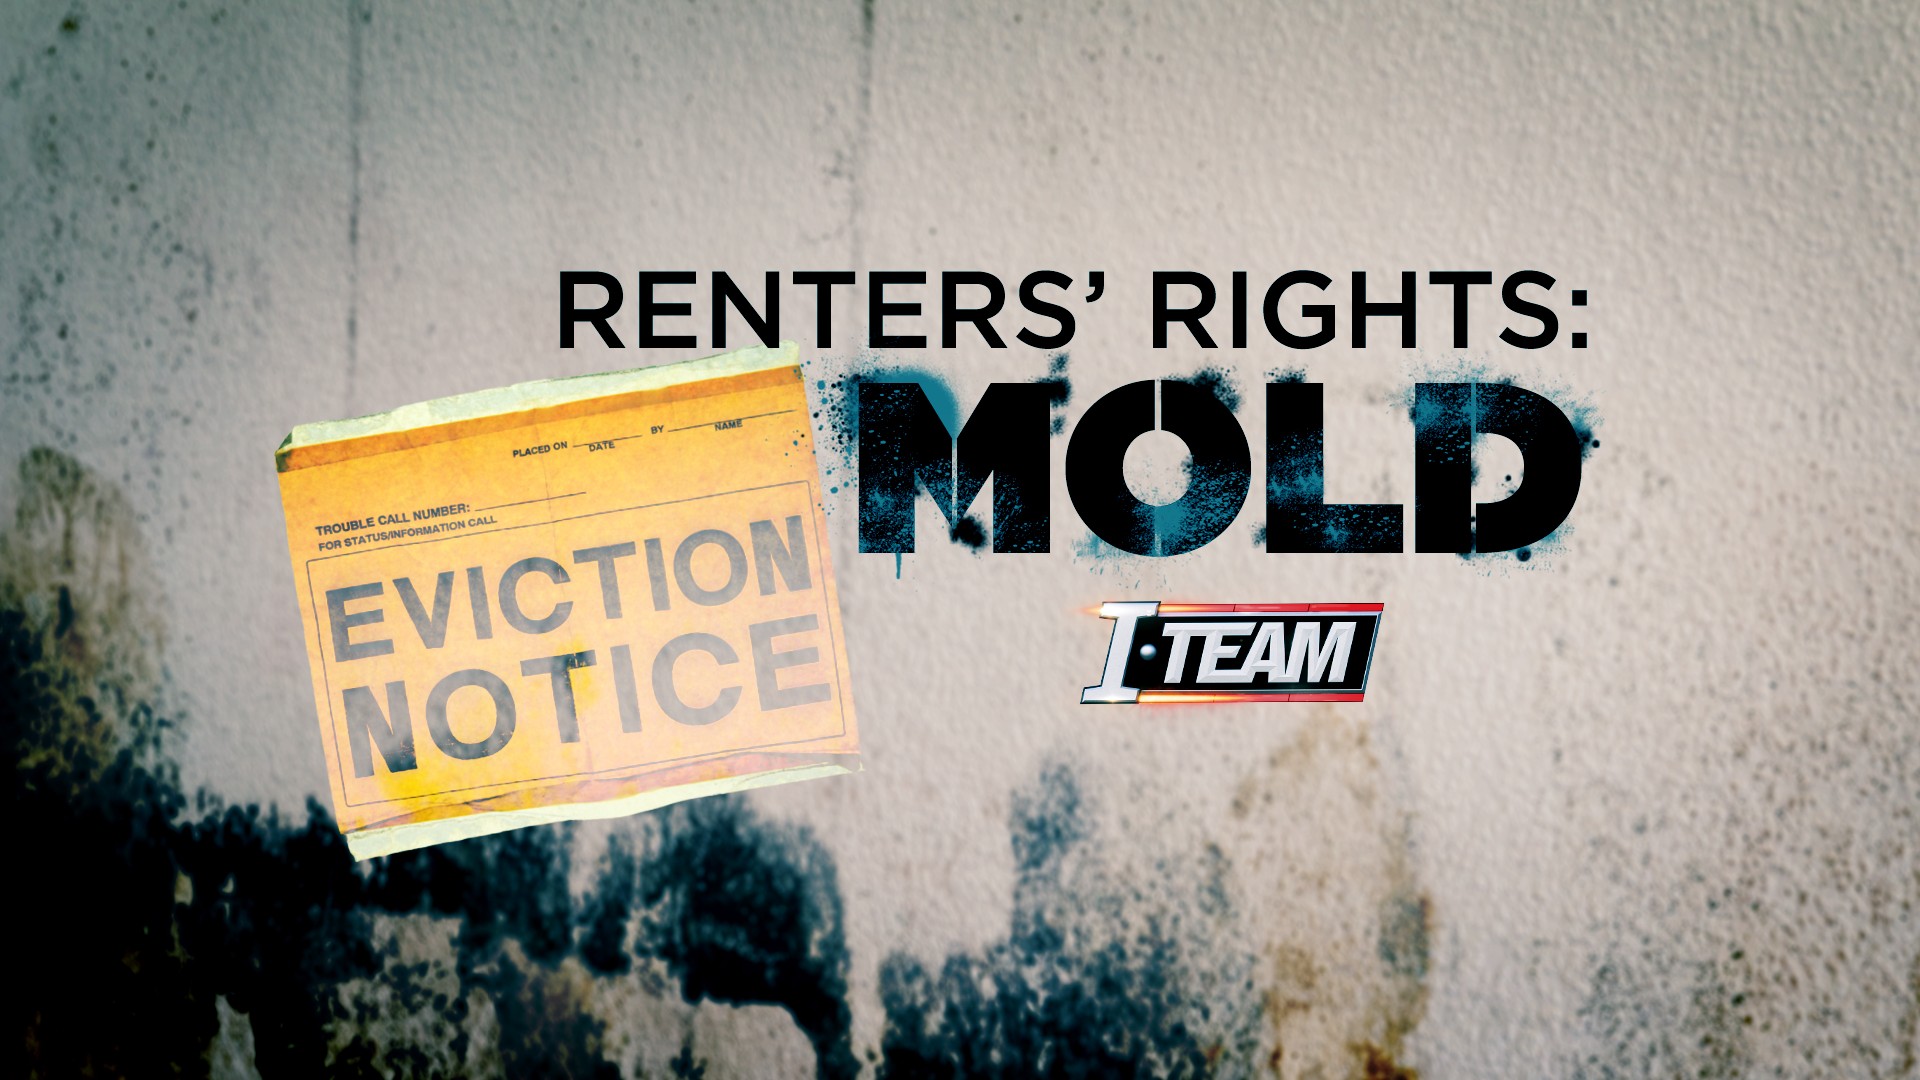 How to Deal With Apartment Mold - The Ultimate Guide